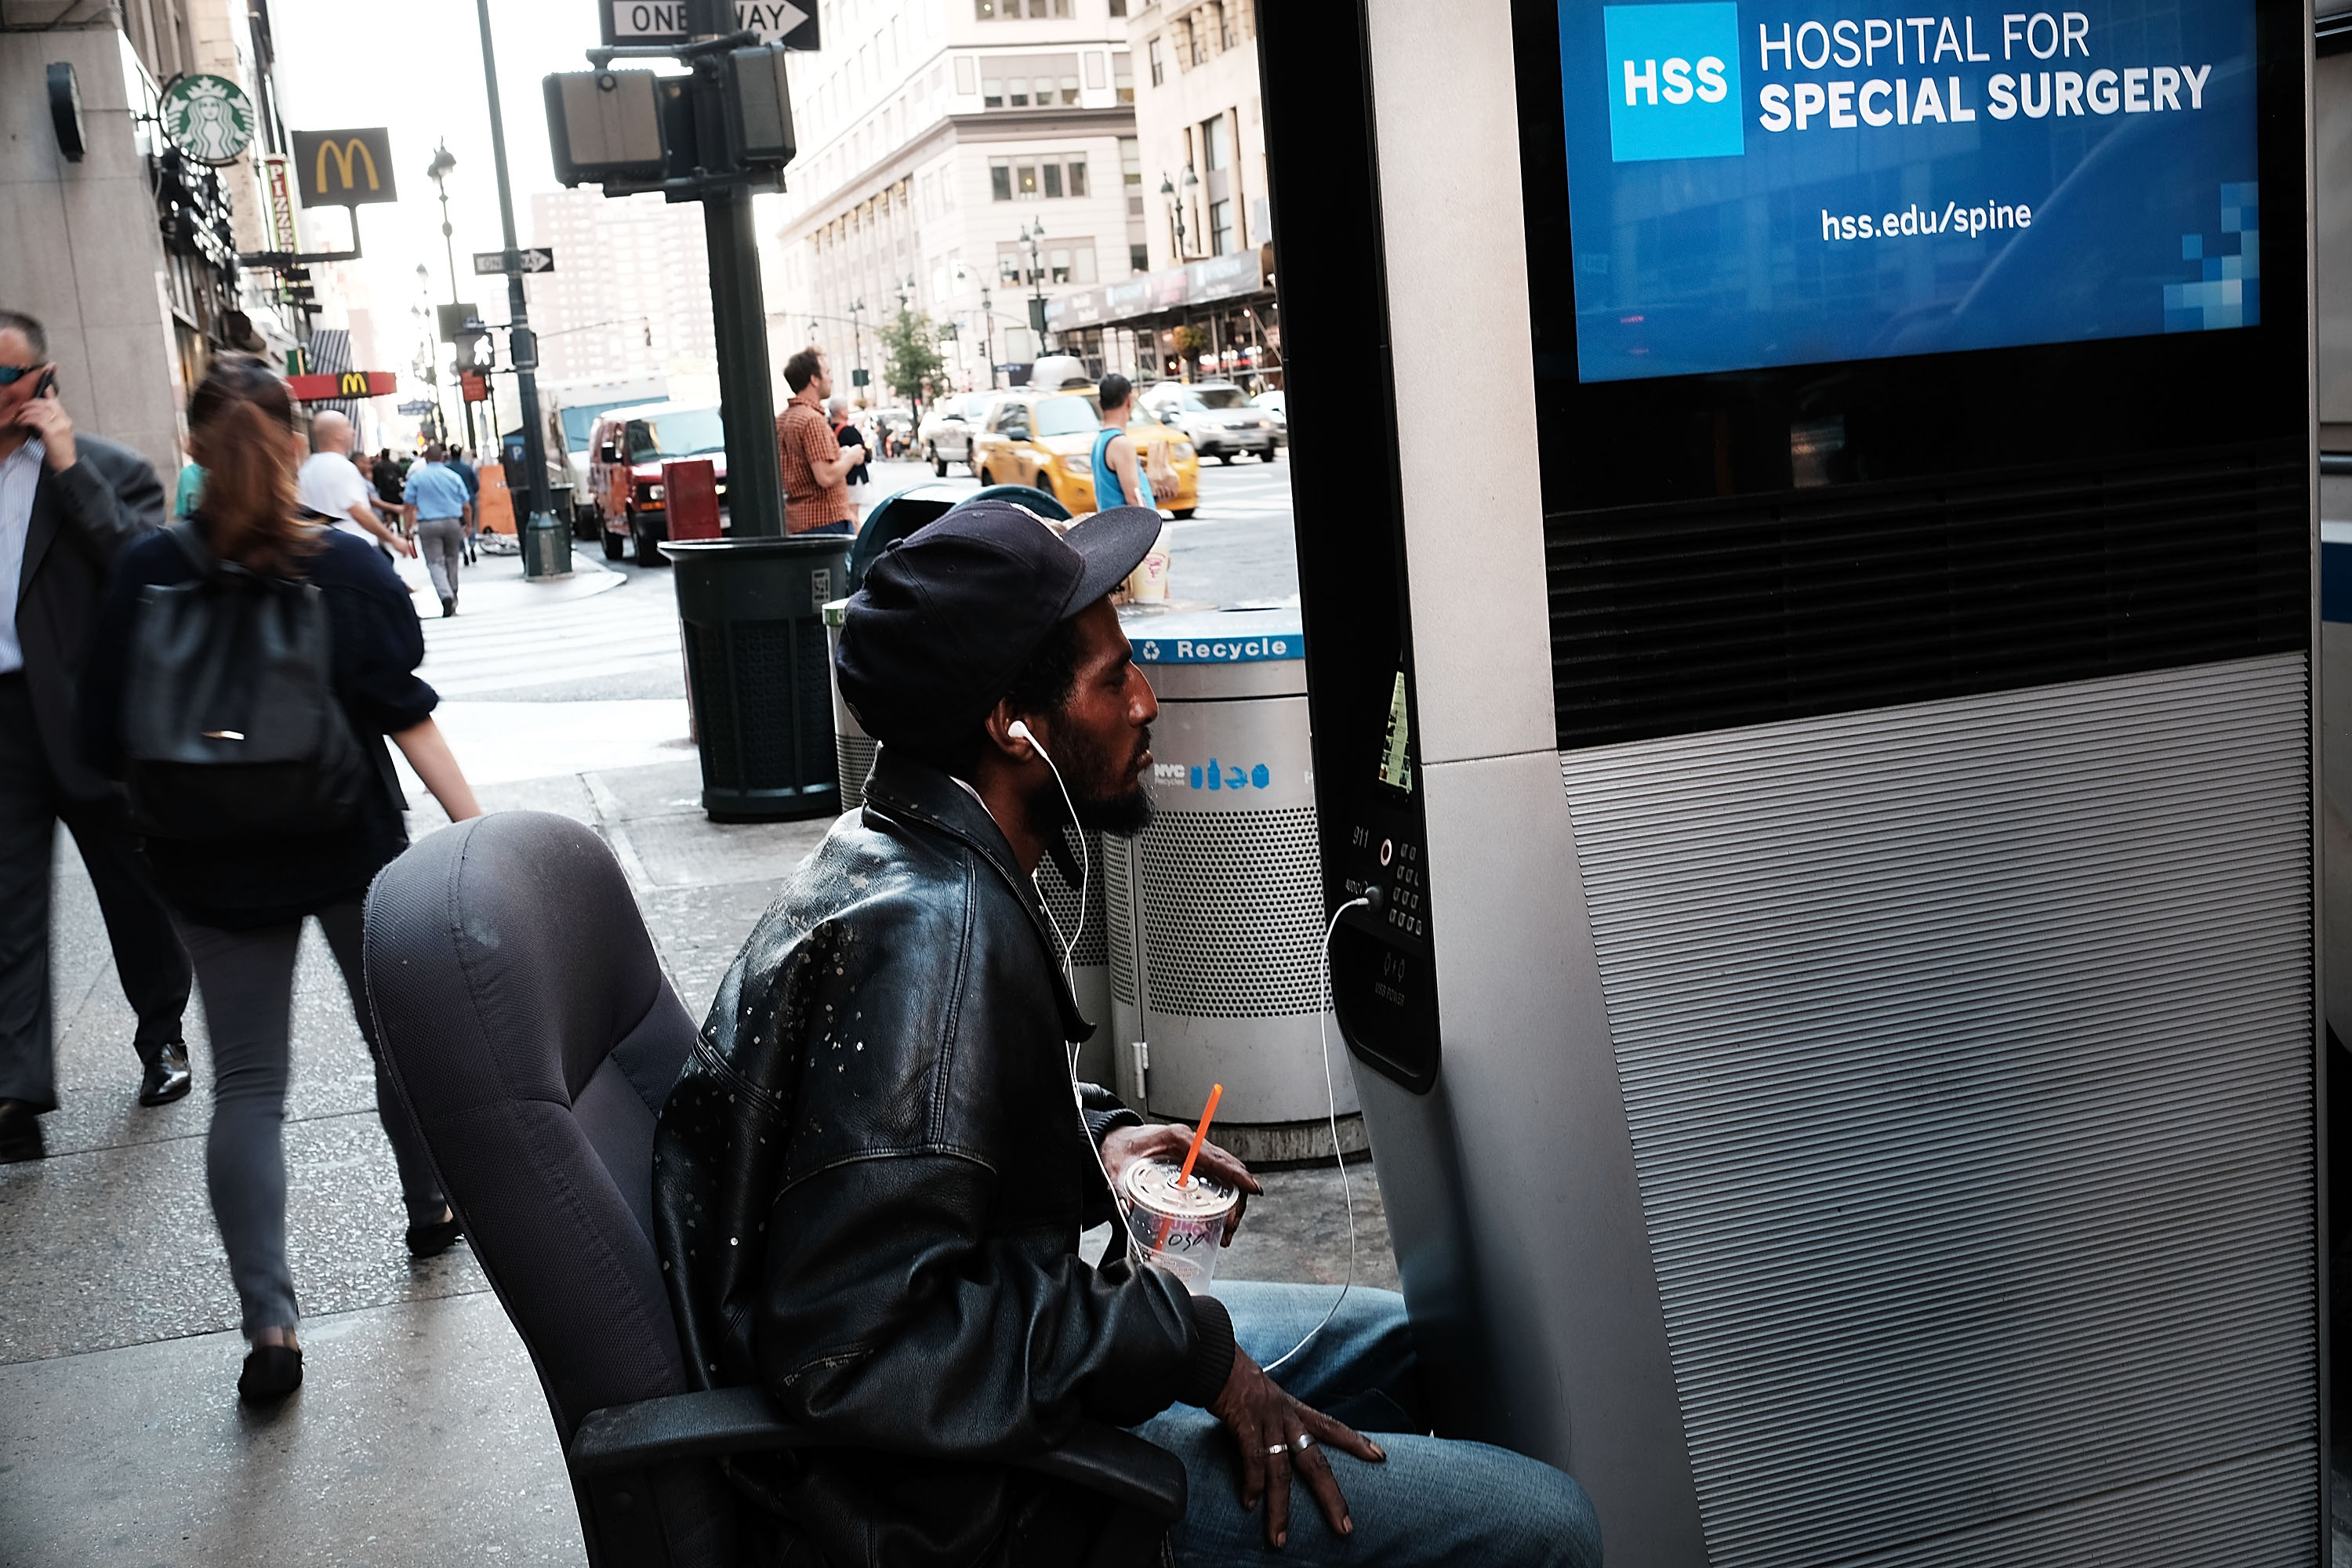 NEW YORK, NY - AUGUST 24: A man uses one of the new Wi-Fi kiosks that offer free web surfing, phone calls and a charging station on August 24, 2016 in New York City. The LinkNYC terminals, which number around 300 in Manhattan, have become especially popular with both the homeless and panhandlers. The free kiosks are being installed to replace obsolete pay phones around Manhattan. (Photo by Spencer Platt/Getty Images)